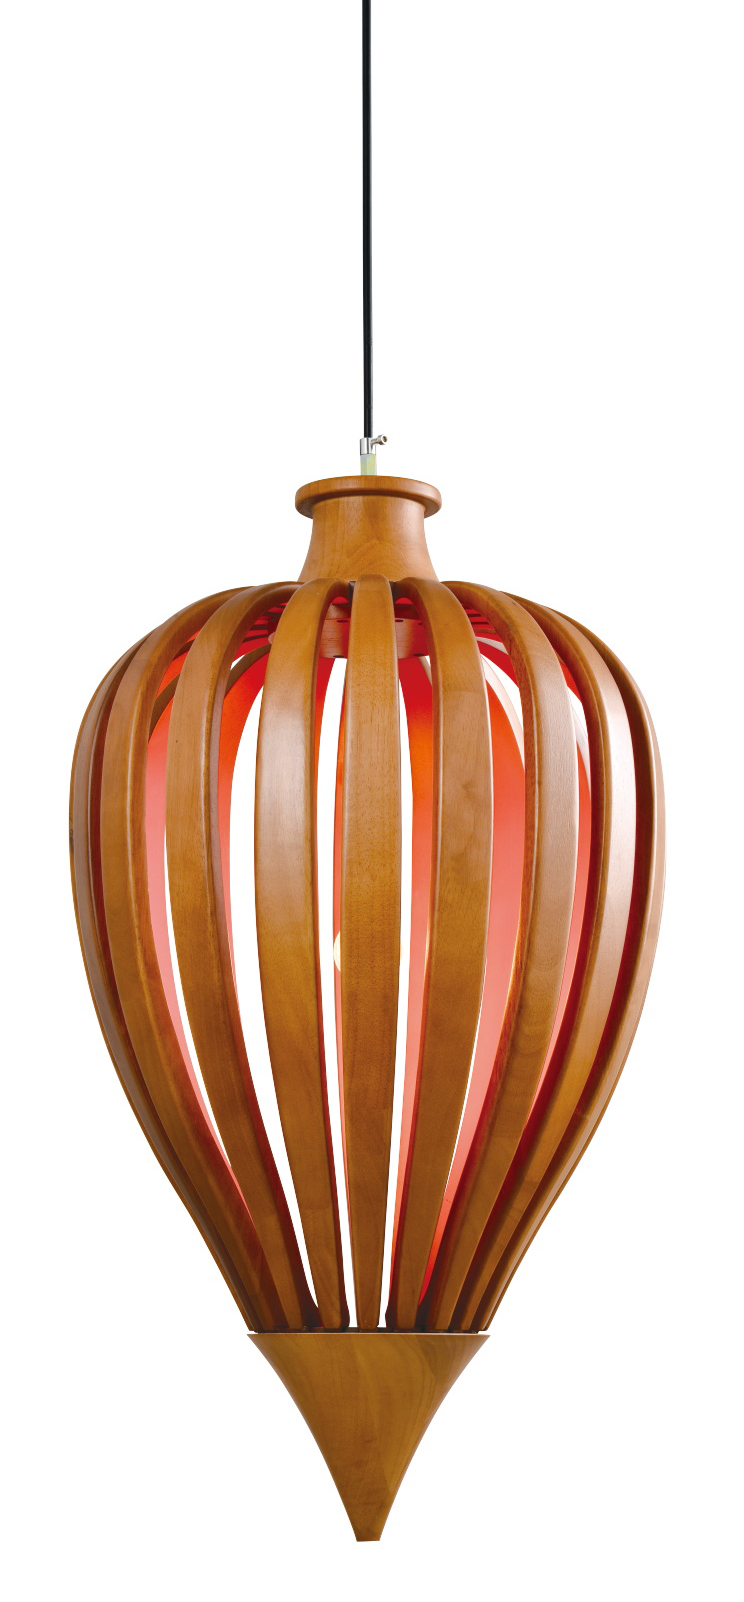 Ф530H900mm suitable for project wood pendant lamp